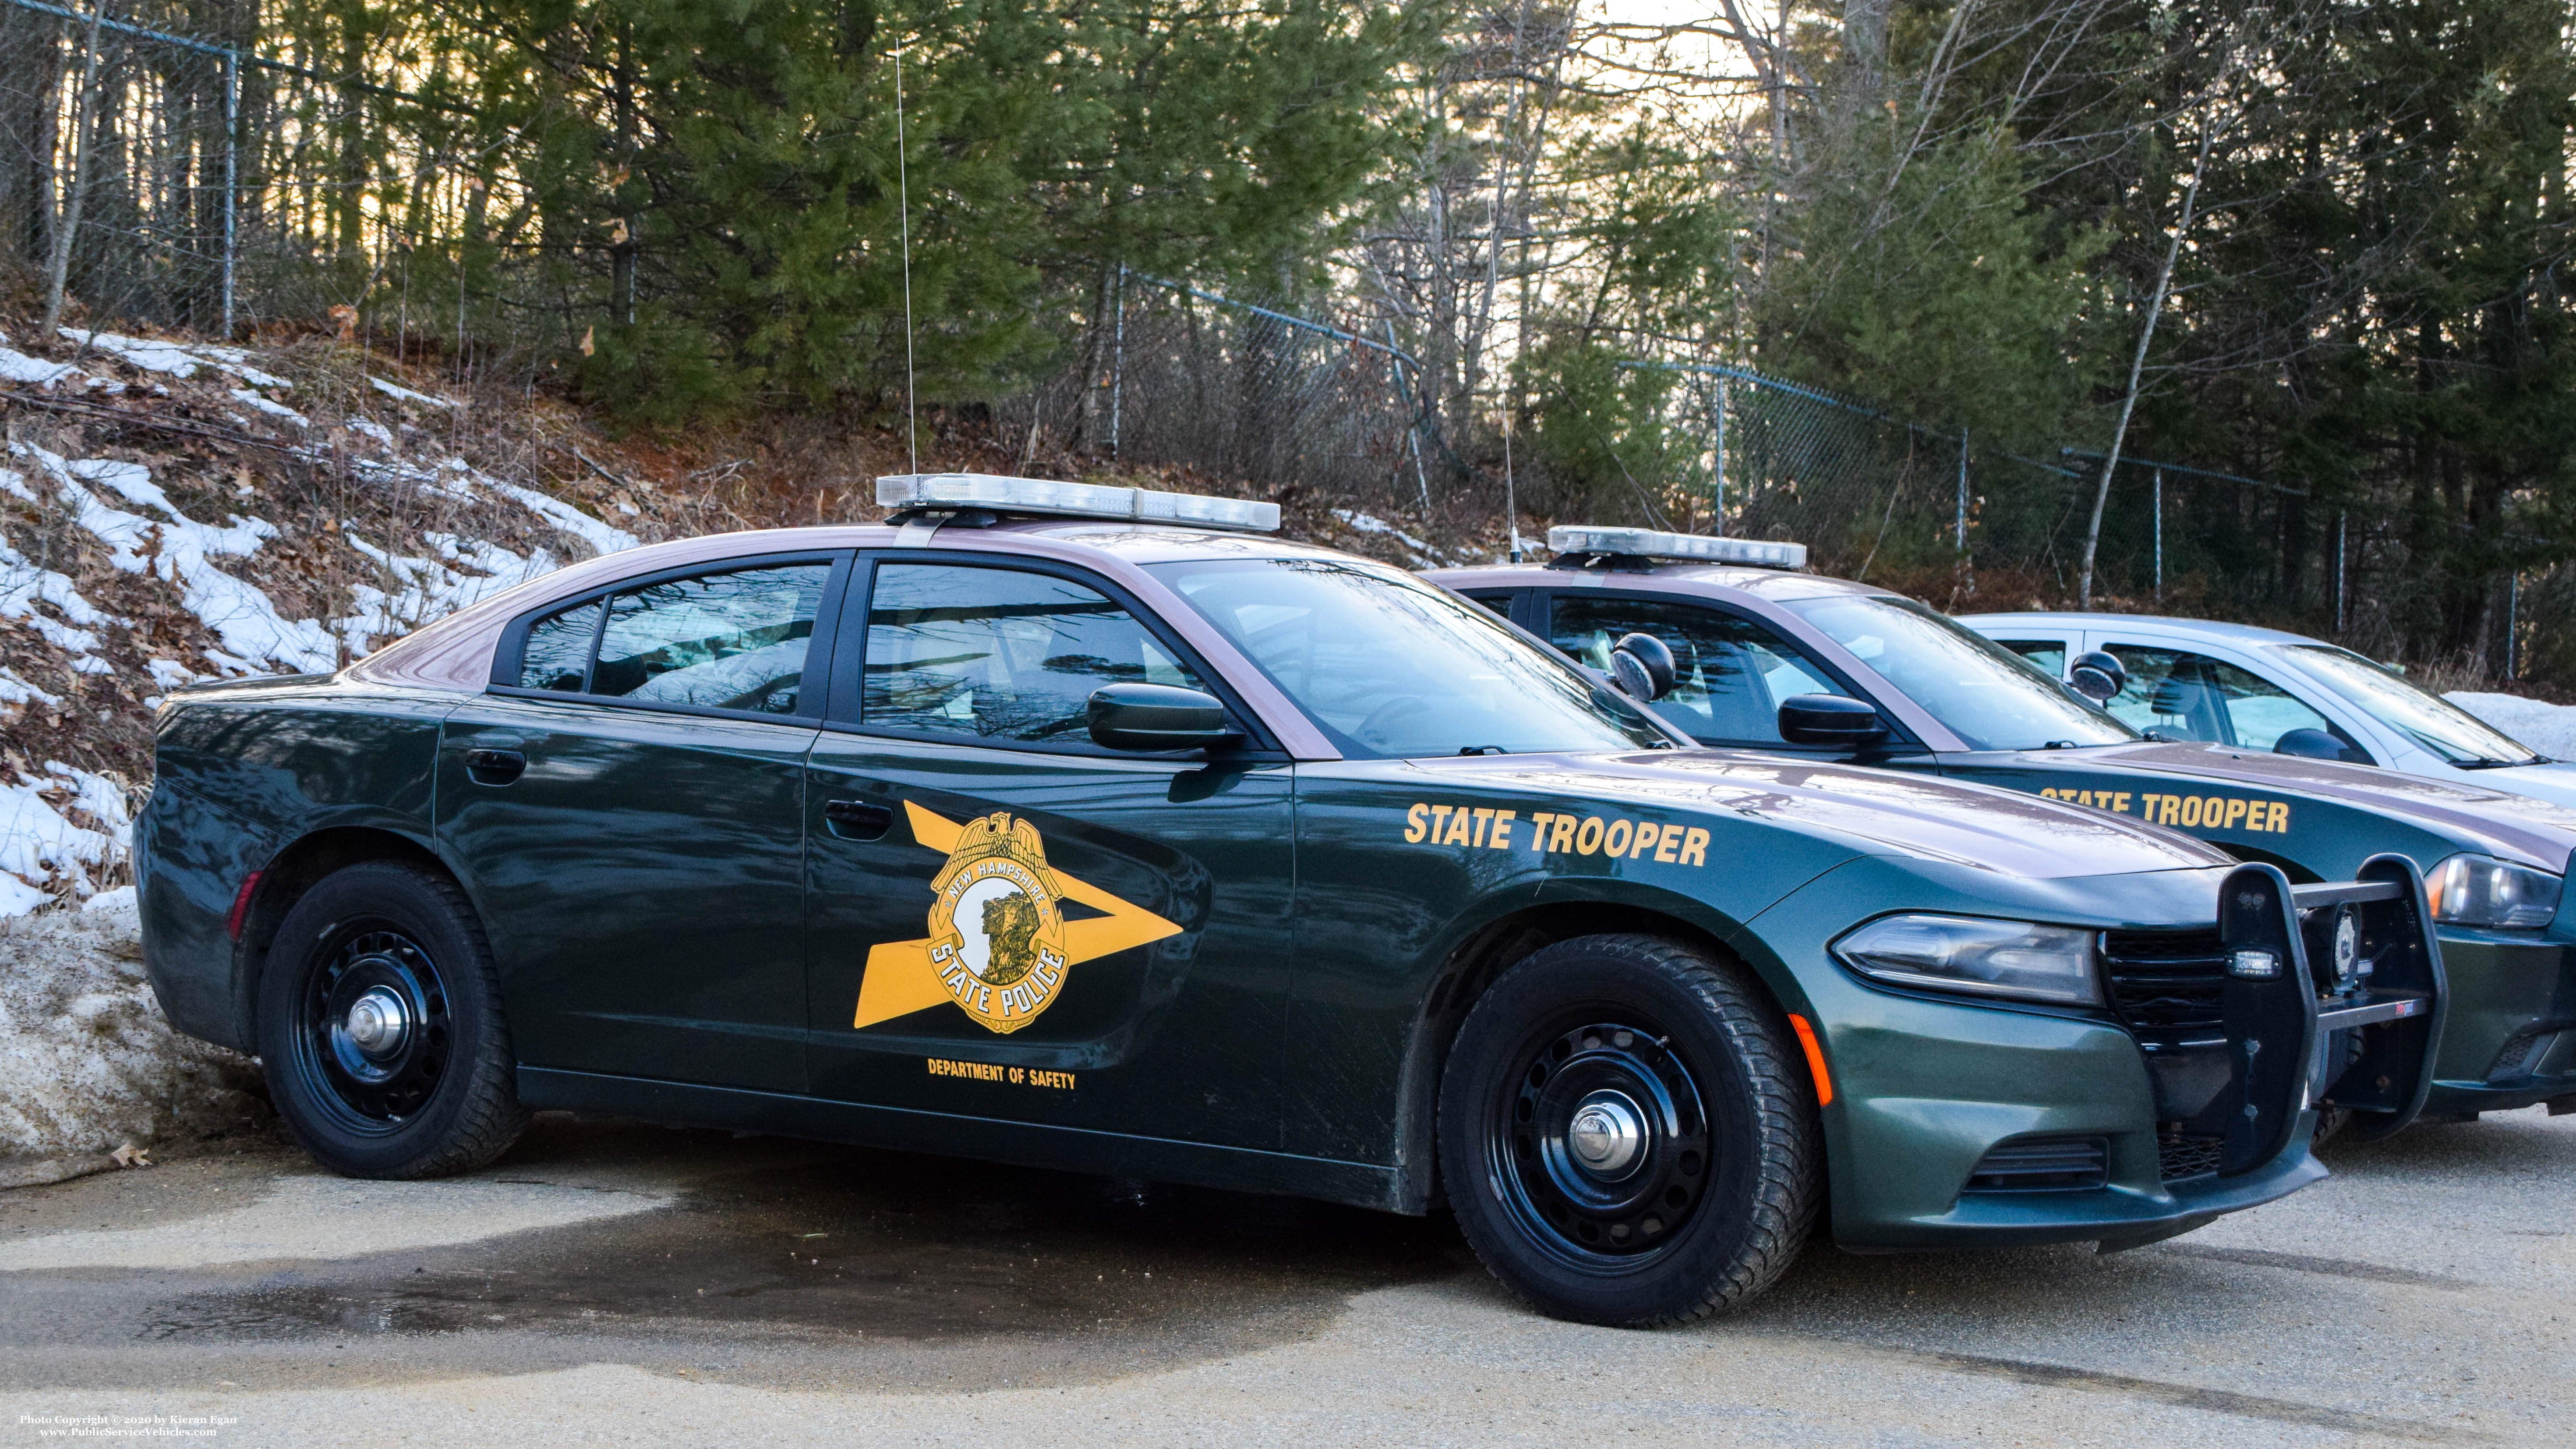 A photo  of New Hampshire State Police
            Cruiser 815, a 2015-2019 Dodge Charger             taken by Kieran Egan